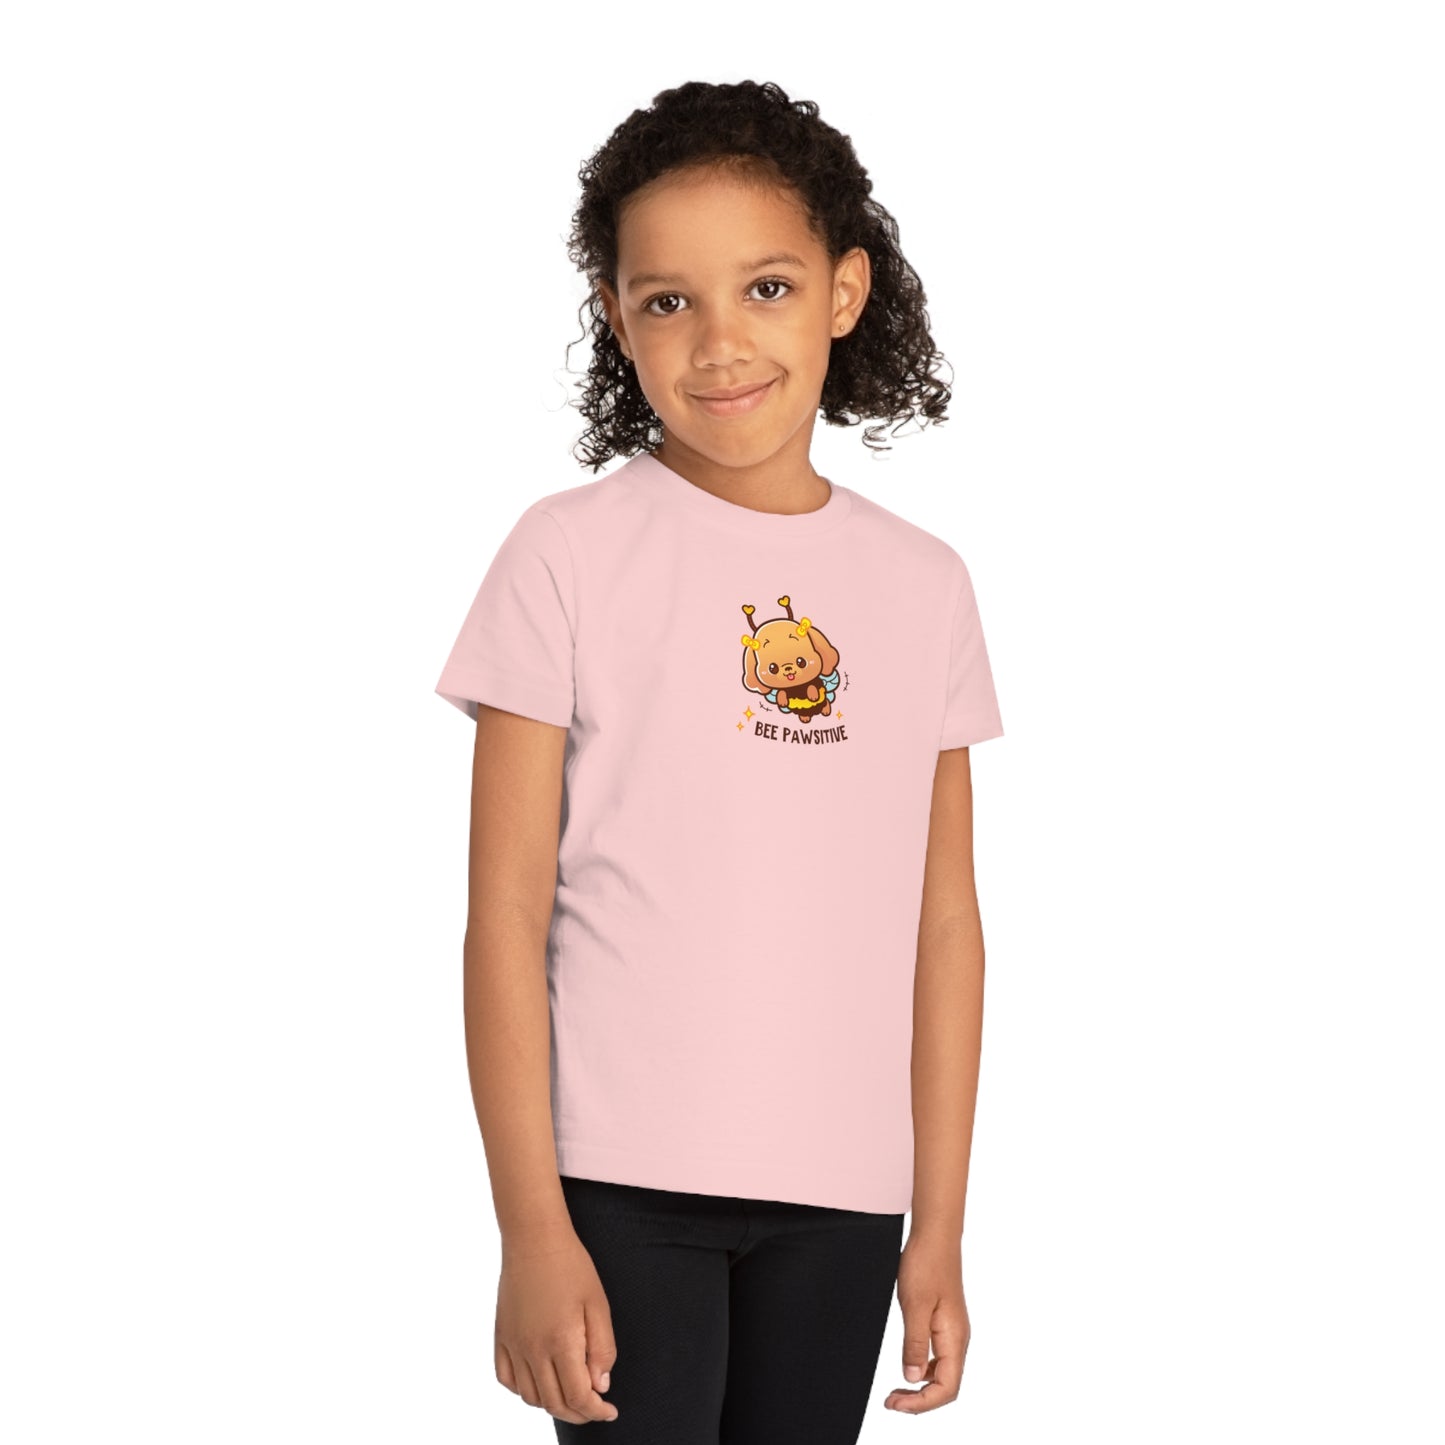 Bee Shirts for Kids, Children's Eco-friendly Cute T-shirt, Kids Natural Kindness T-shirt, Toddler & Youth Tee, Kids Positivity Tee